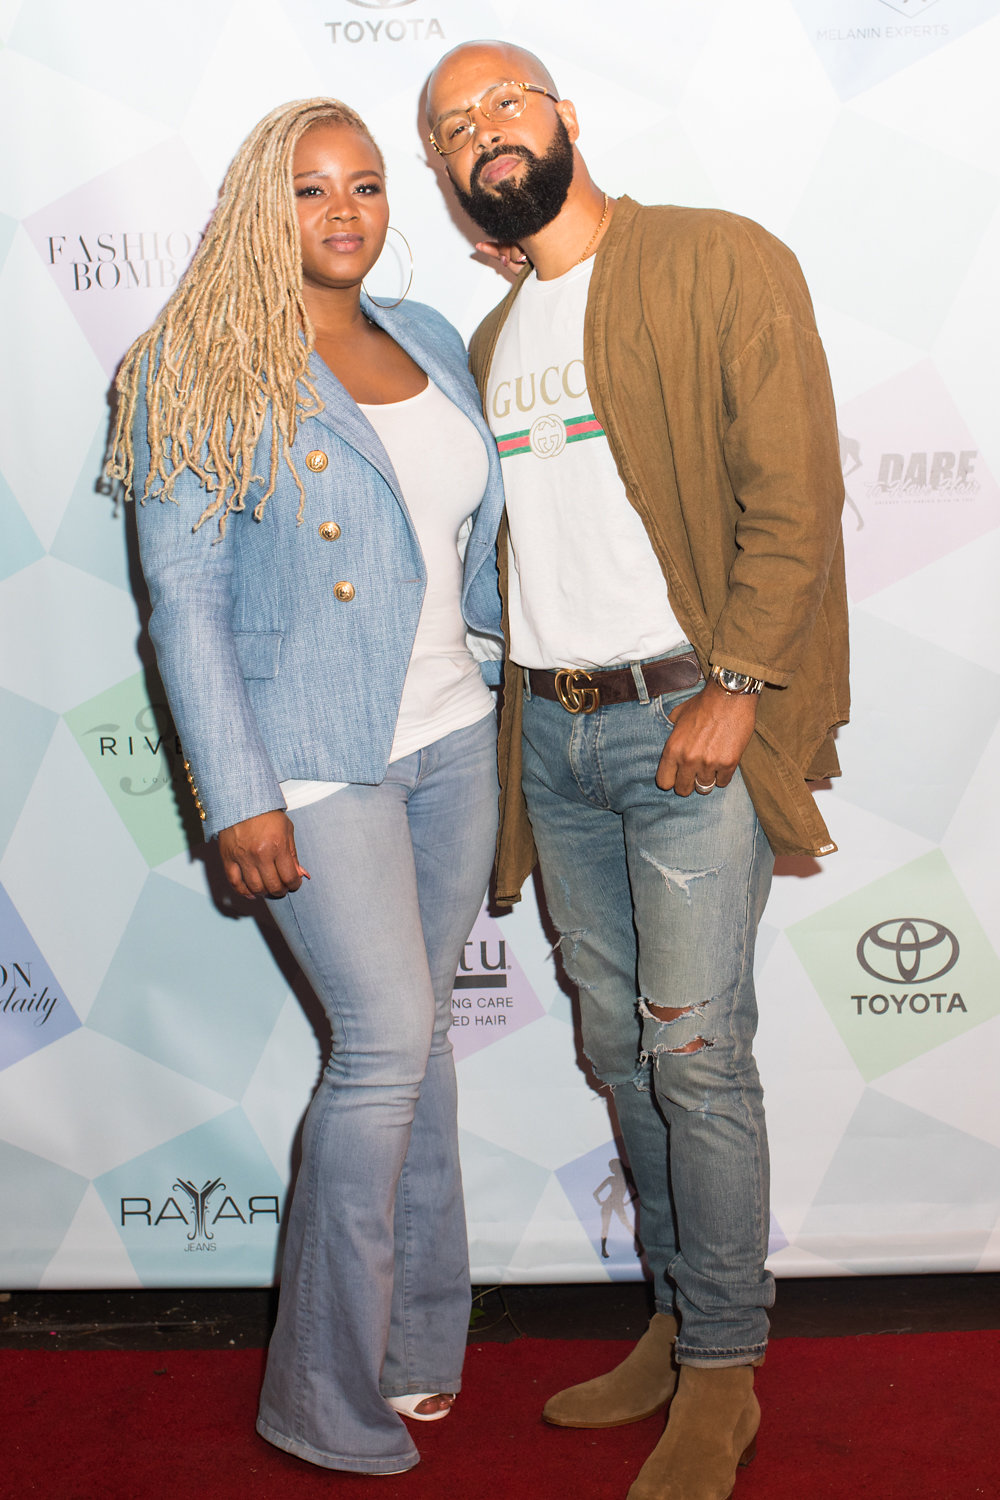 kenny-burns-444-3-claire-sulmers-fashion-bomb-daily-cocktails-with-claire-x-ty-hunter-la-sponsored-by-toyota-cantu-dare-to-have-hair-rayar-jeans-and-urban-skin-rx